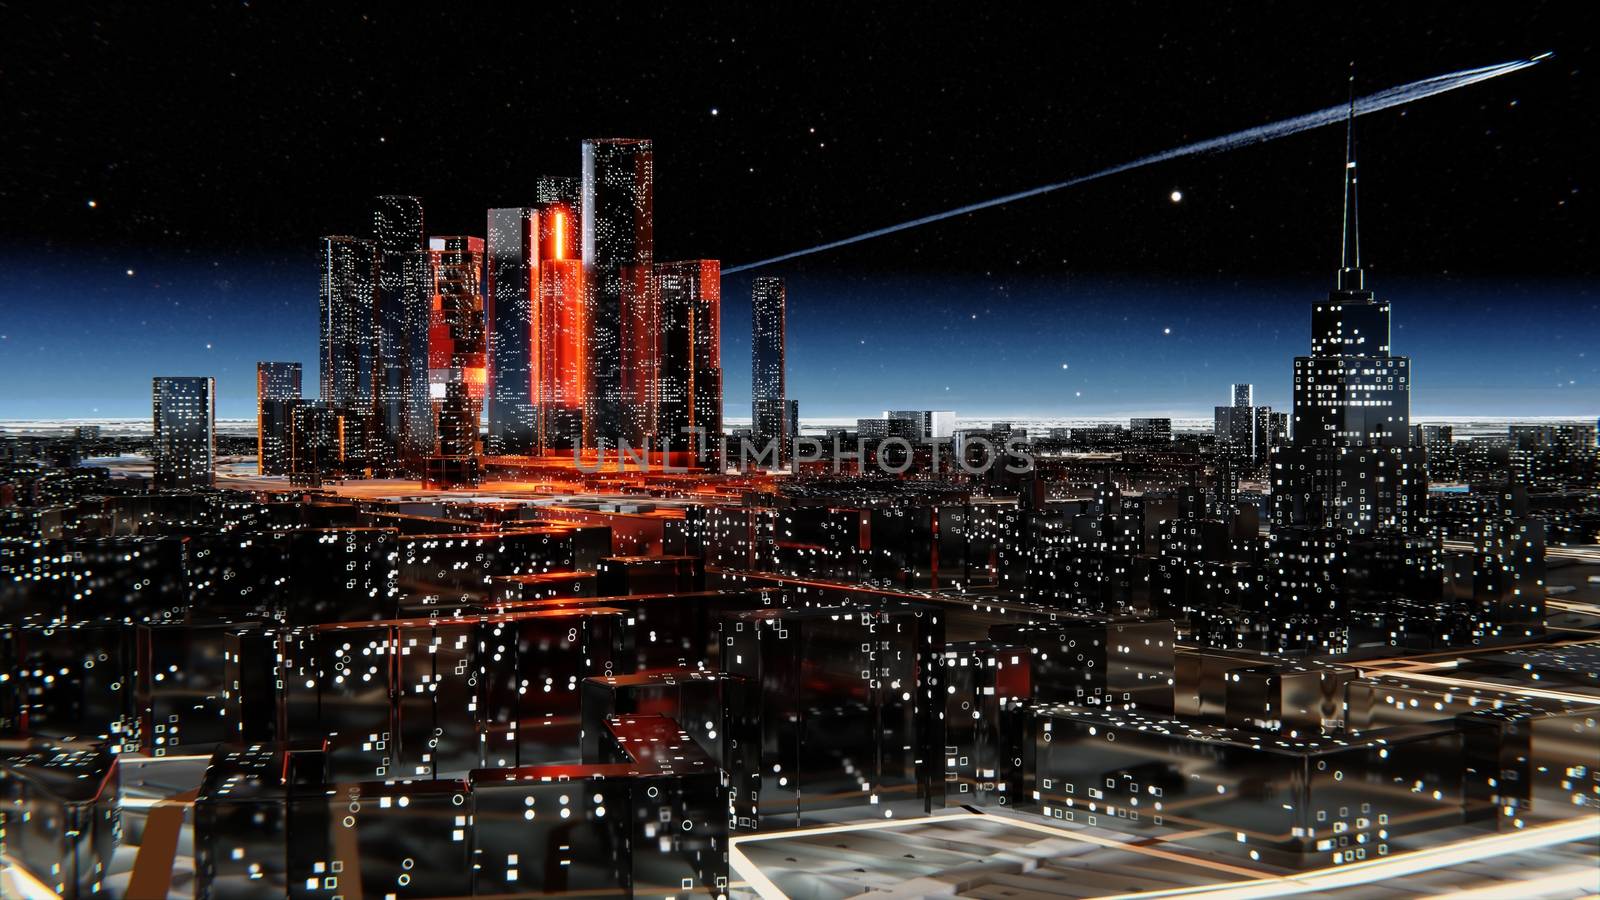 Futuristic glass city with luminous windows. Luminous roads and bright flashes between houses. Starry atmospheric sky with a flying airplane on the background. 3D illustration